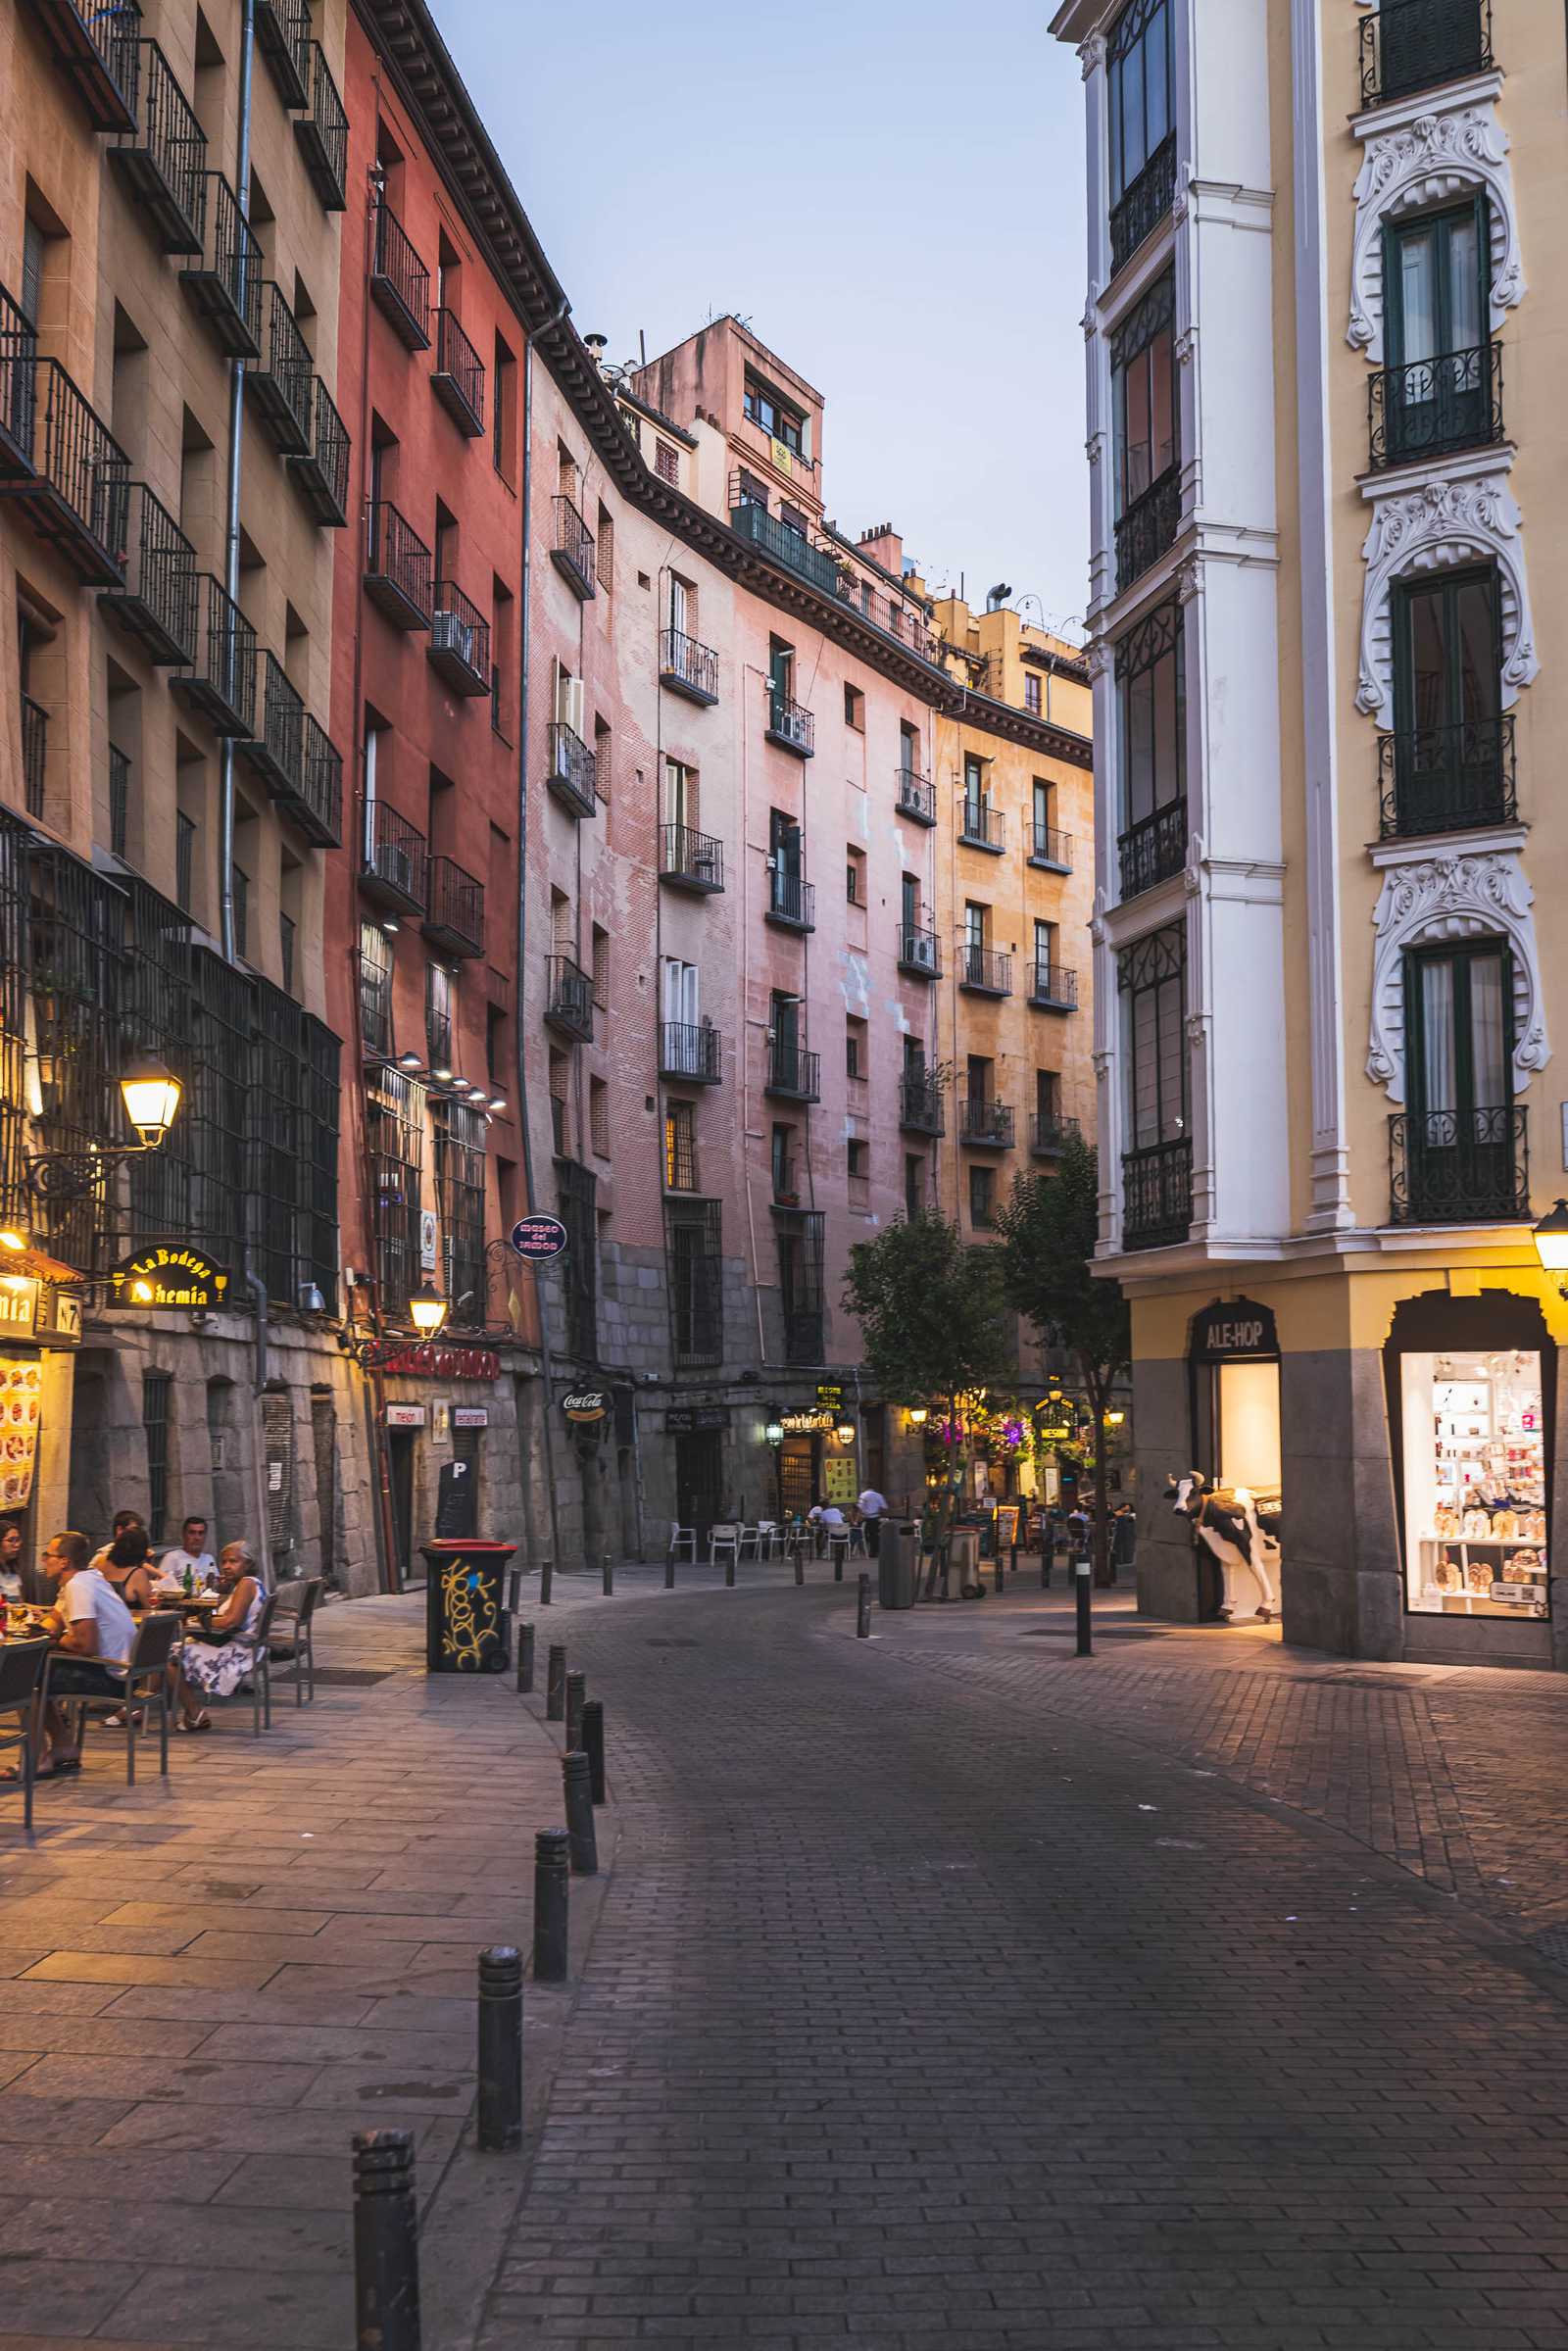 A typical Madrid street winds around a corner with shops and cafes on either side